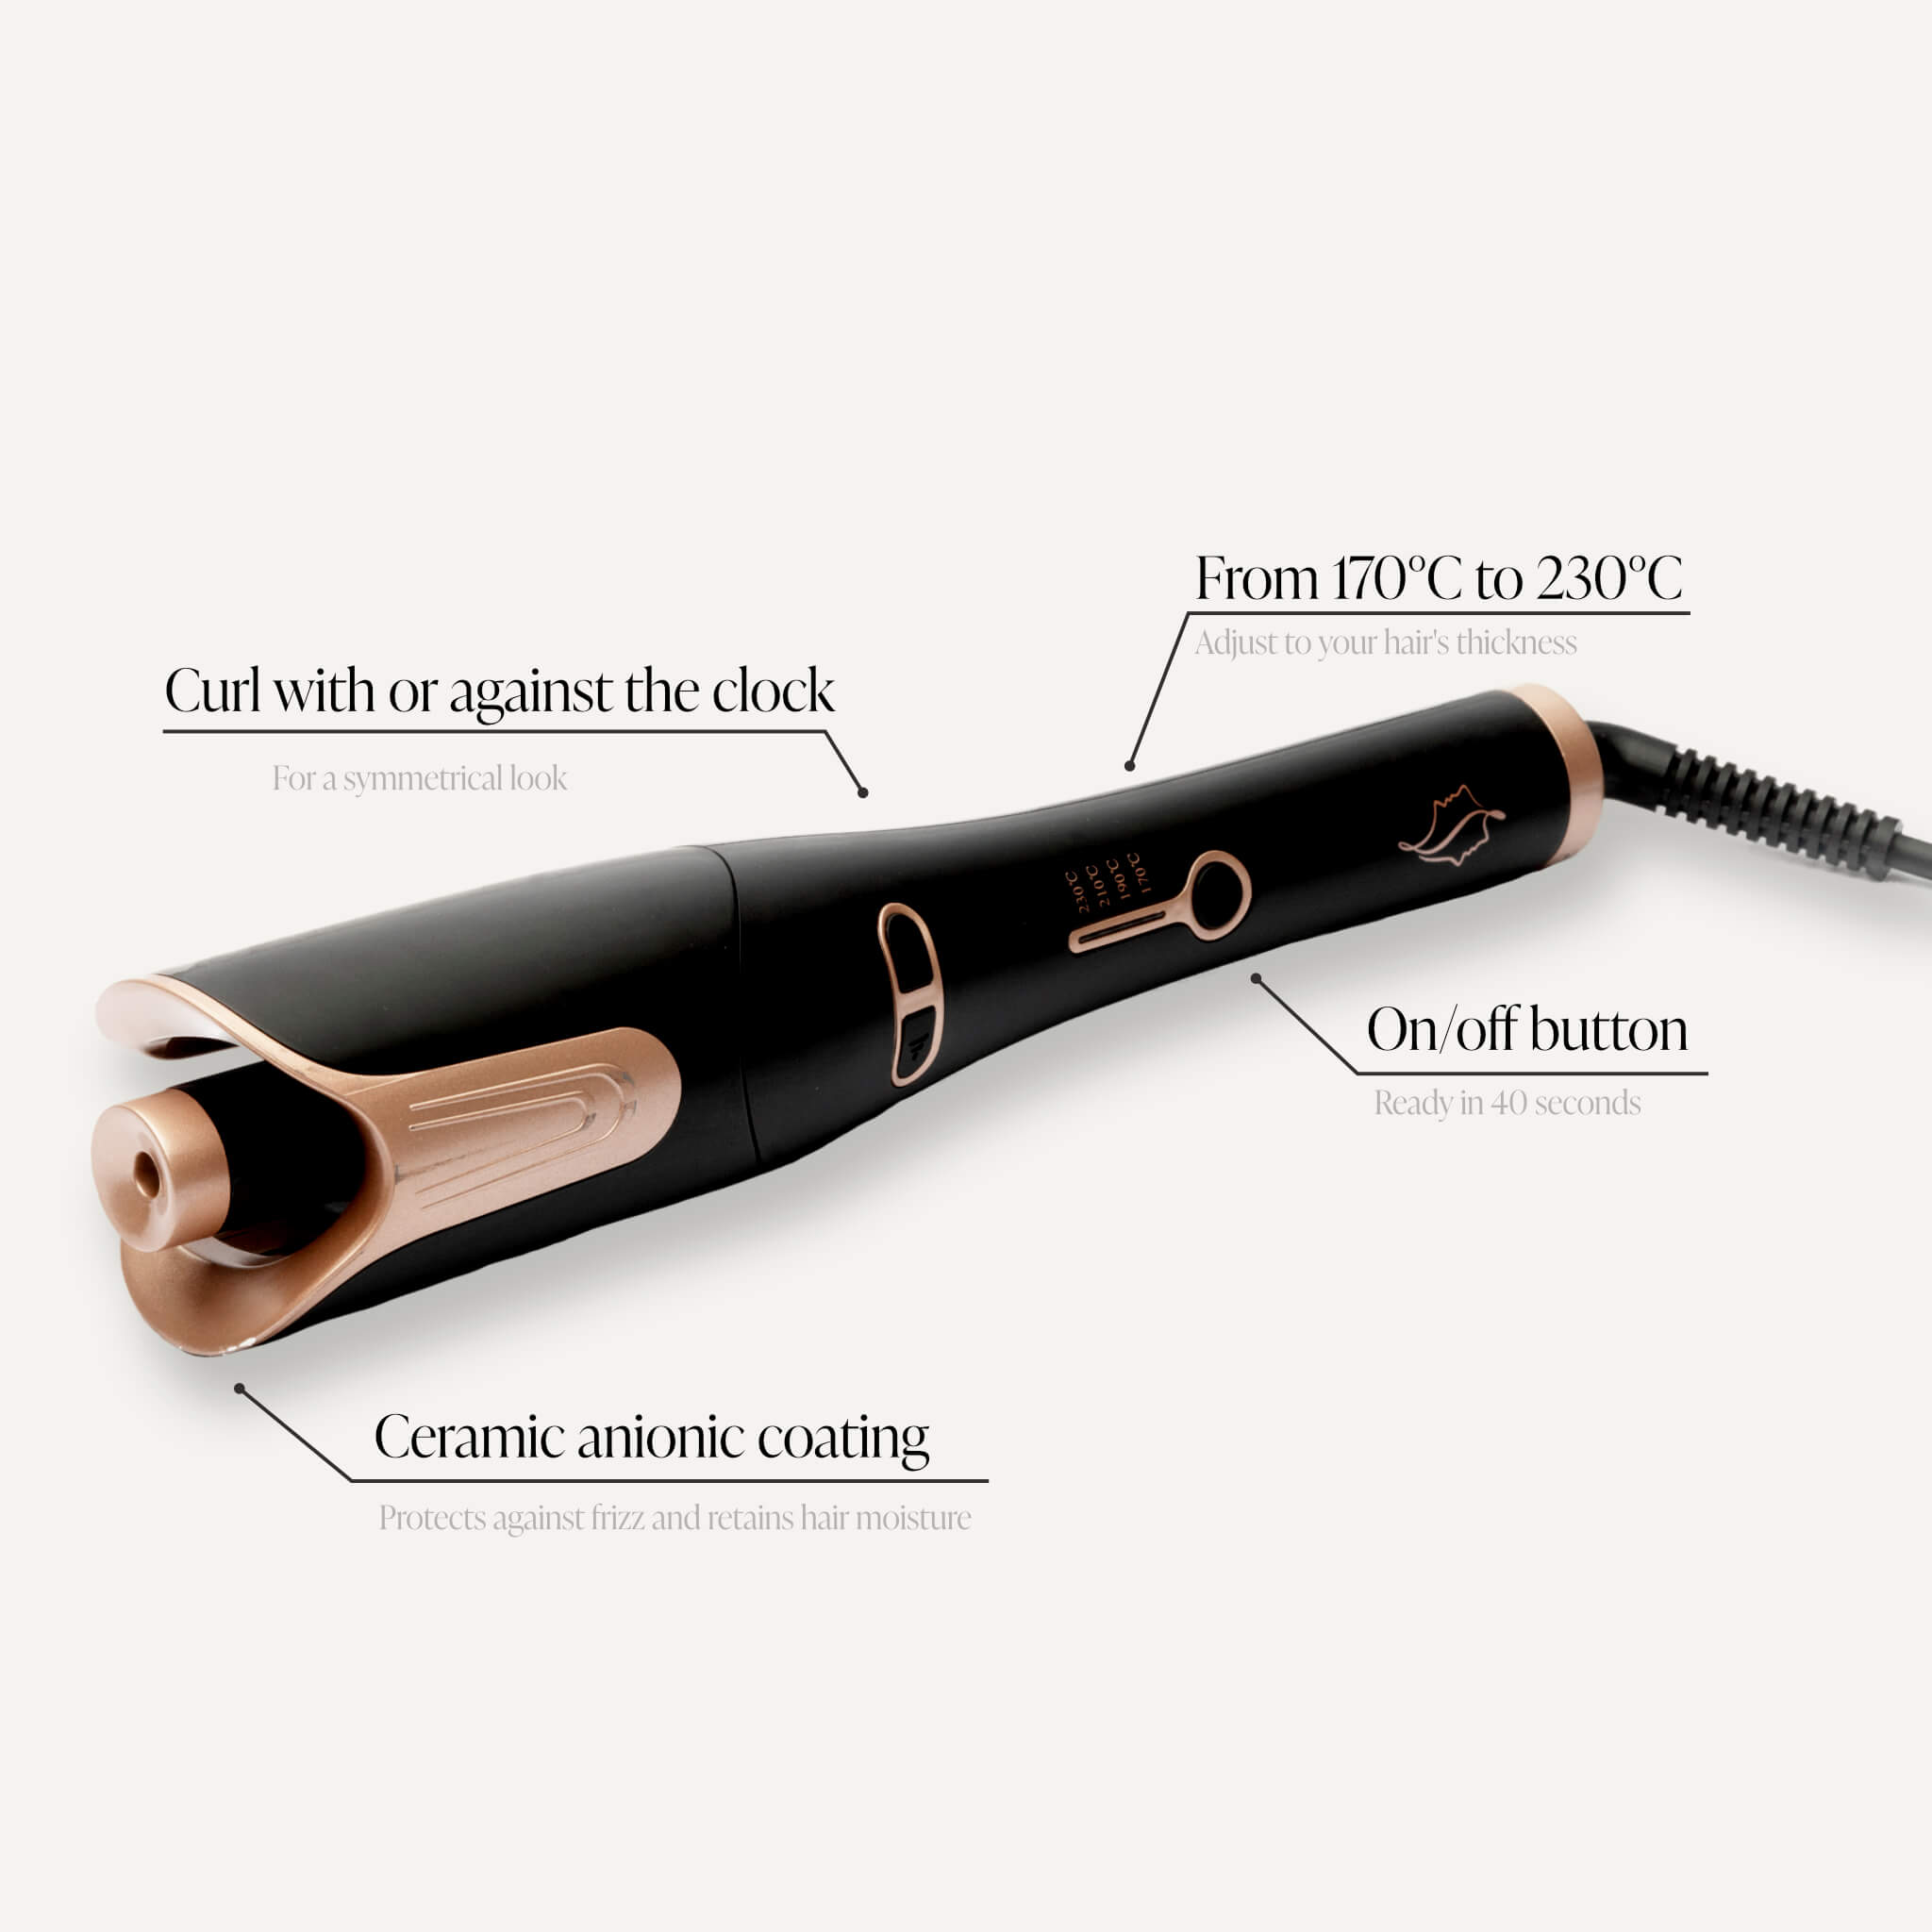 Comforth Curler Pro - Automatic Curling Iron